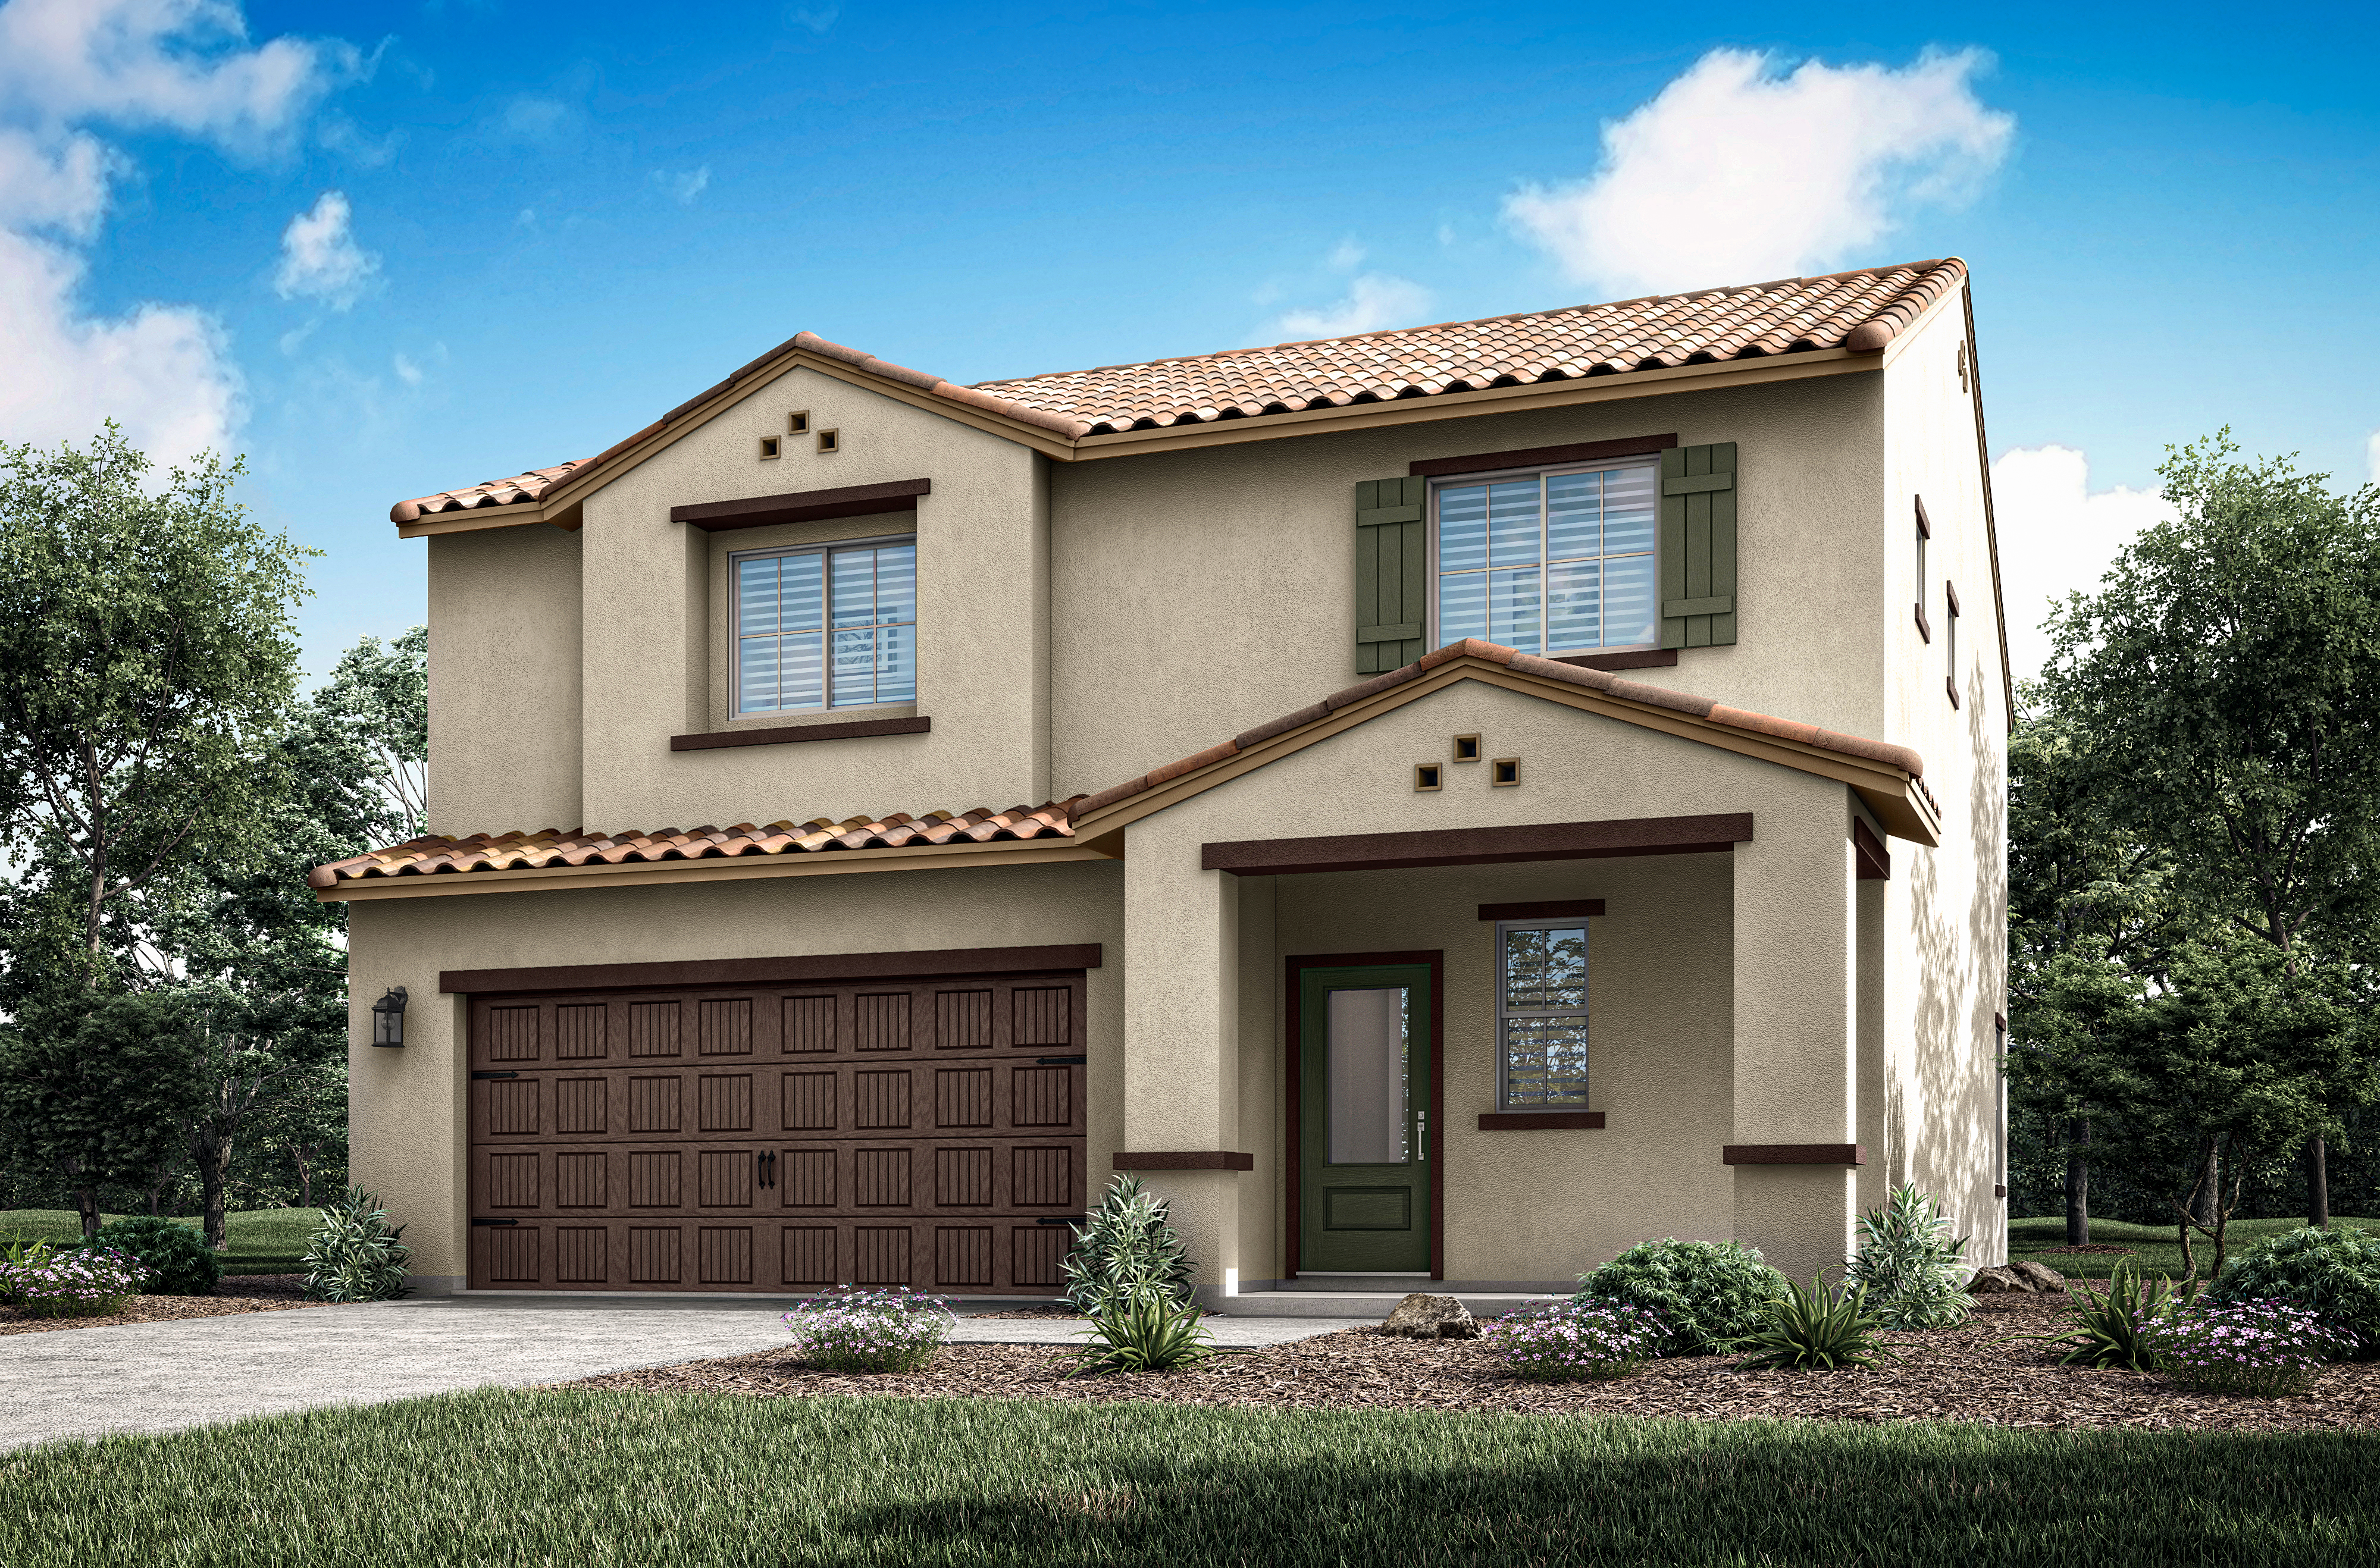 The Redondo Plan by LGI Homes at Harvest Grove in Bakersfield features four bedrooms, two-and-a-half bathrooms, and a spacious family room.